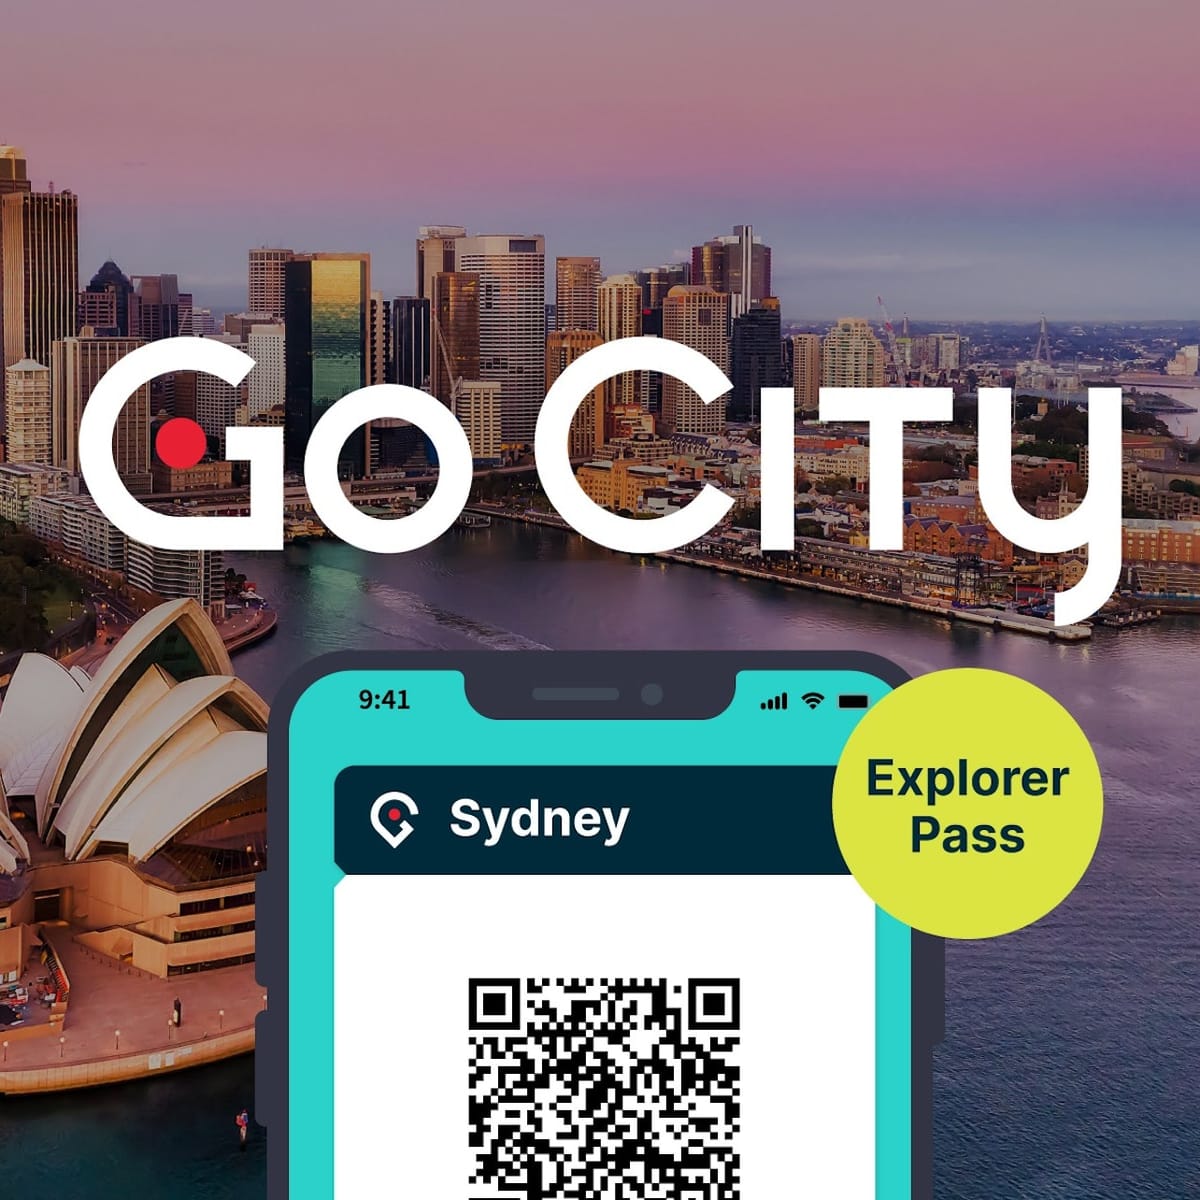 sydney-explorer-pass-access-to-up-to-7-attractions_1